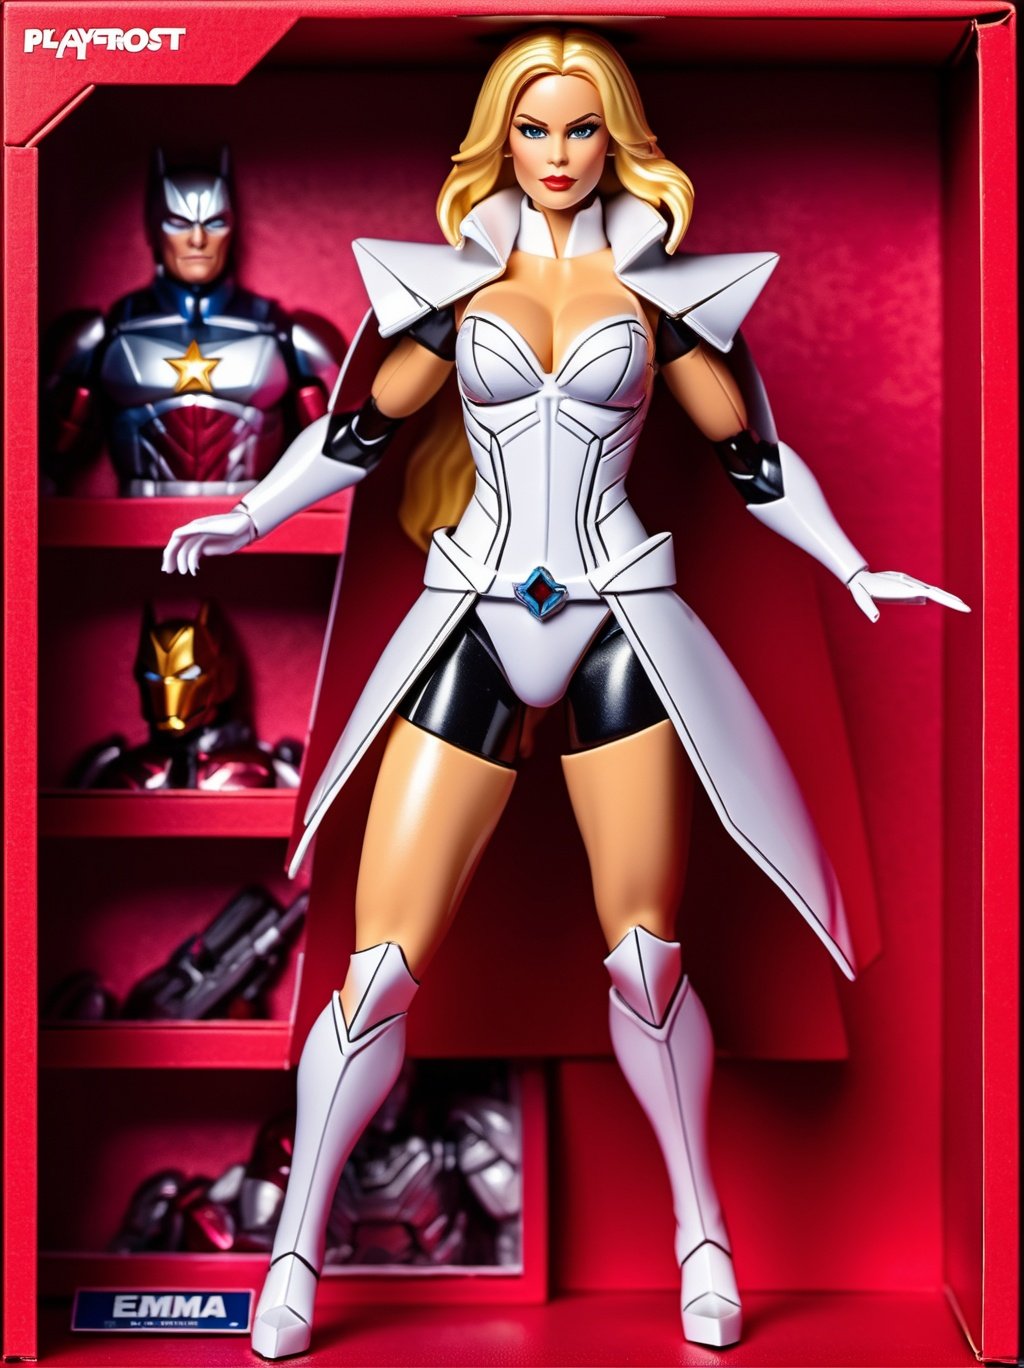 ActionFigureQuiron style, action figure, toy, doll, character print, (best quality:1.15), (masterpiece:1.15), (detailed:1.15), (realistic:1.2), (intricate:1.4), simple background, cover page, card, in a gift box, no humans, (emma frost), gift box, playset, in a box, full body, toy playset pack, in a gift box, premium playset toy box,<lyco:SDXL1.0_quiron_ActionFigure_v3_lycoris:0.57>